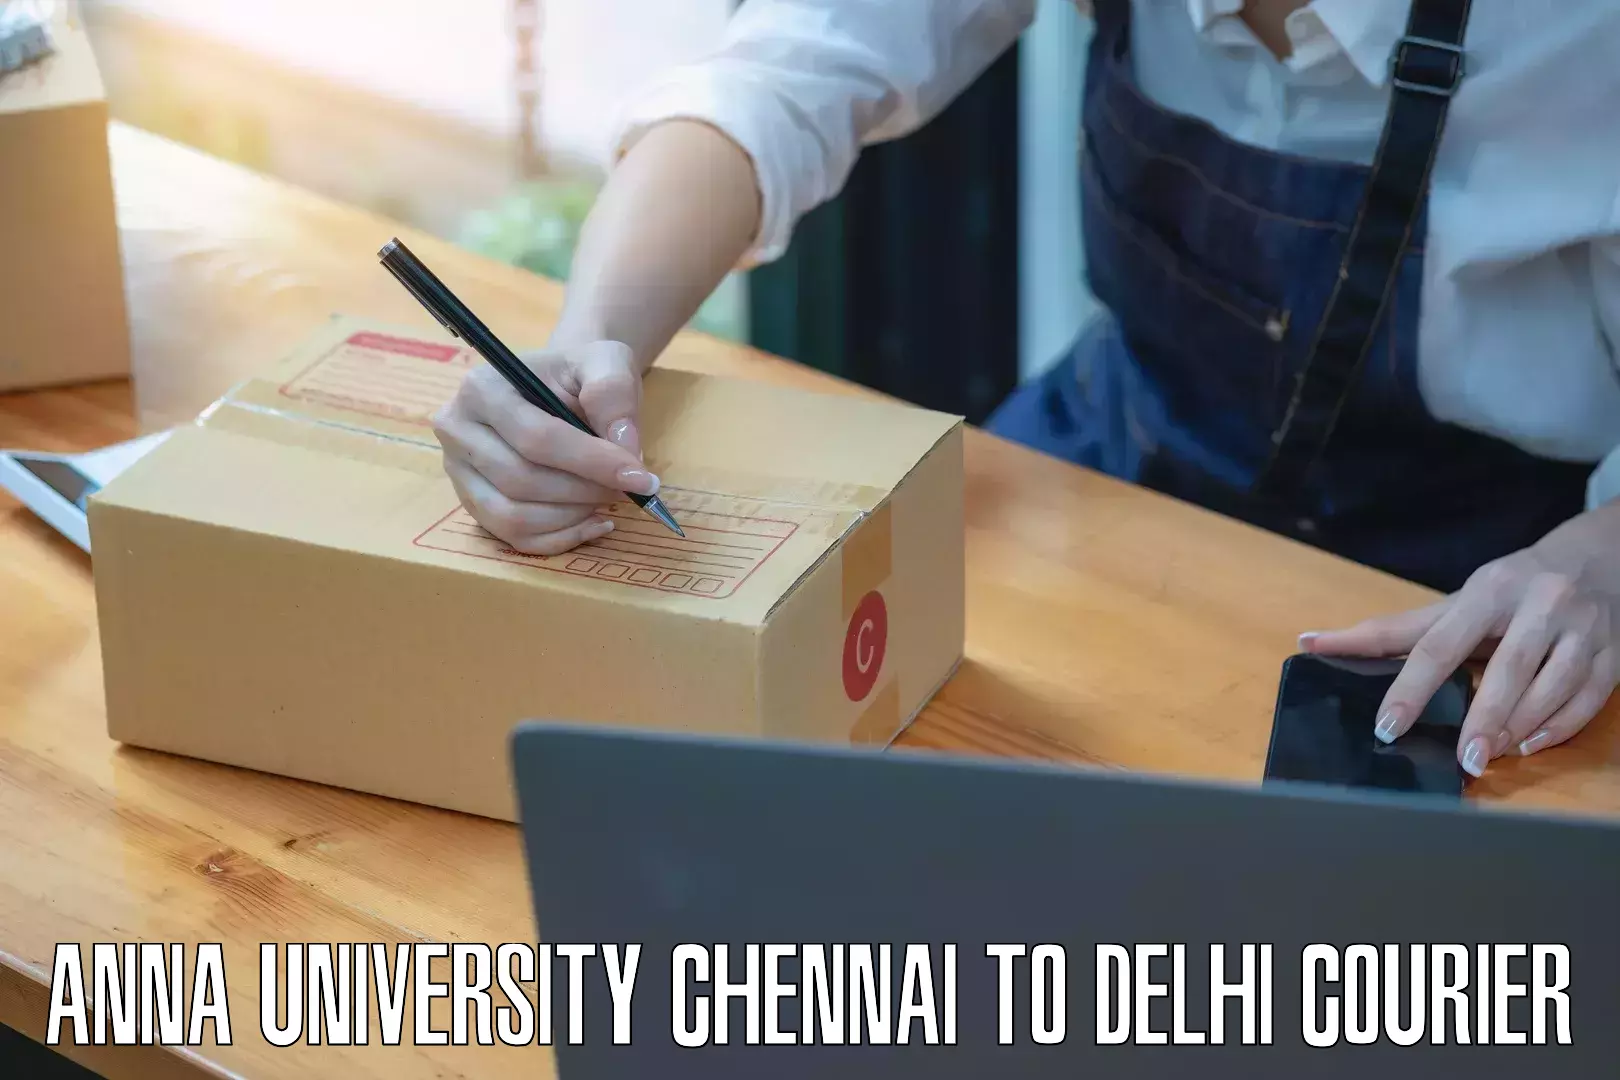 User-friendly delivery service Anna University Chennai to Lodhi Road